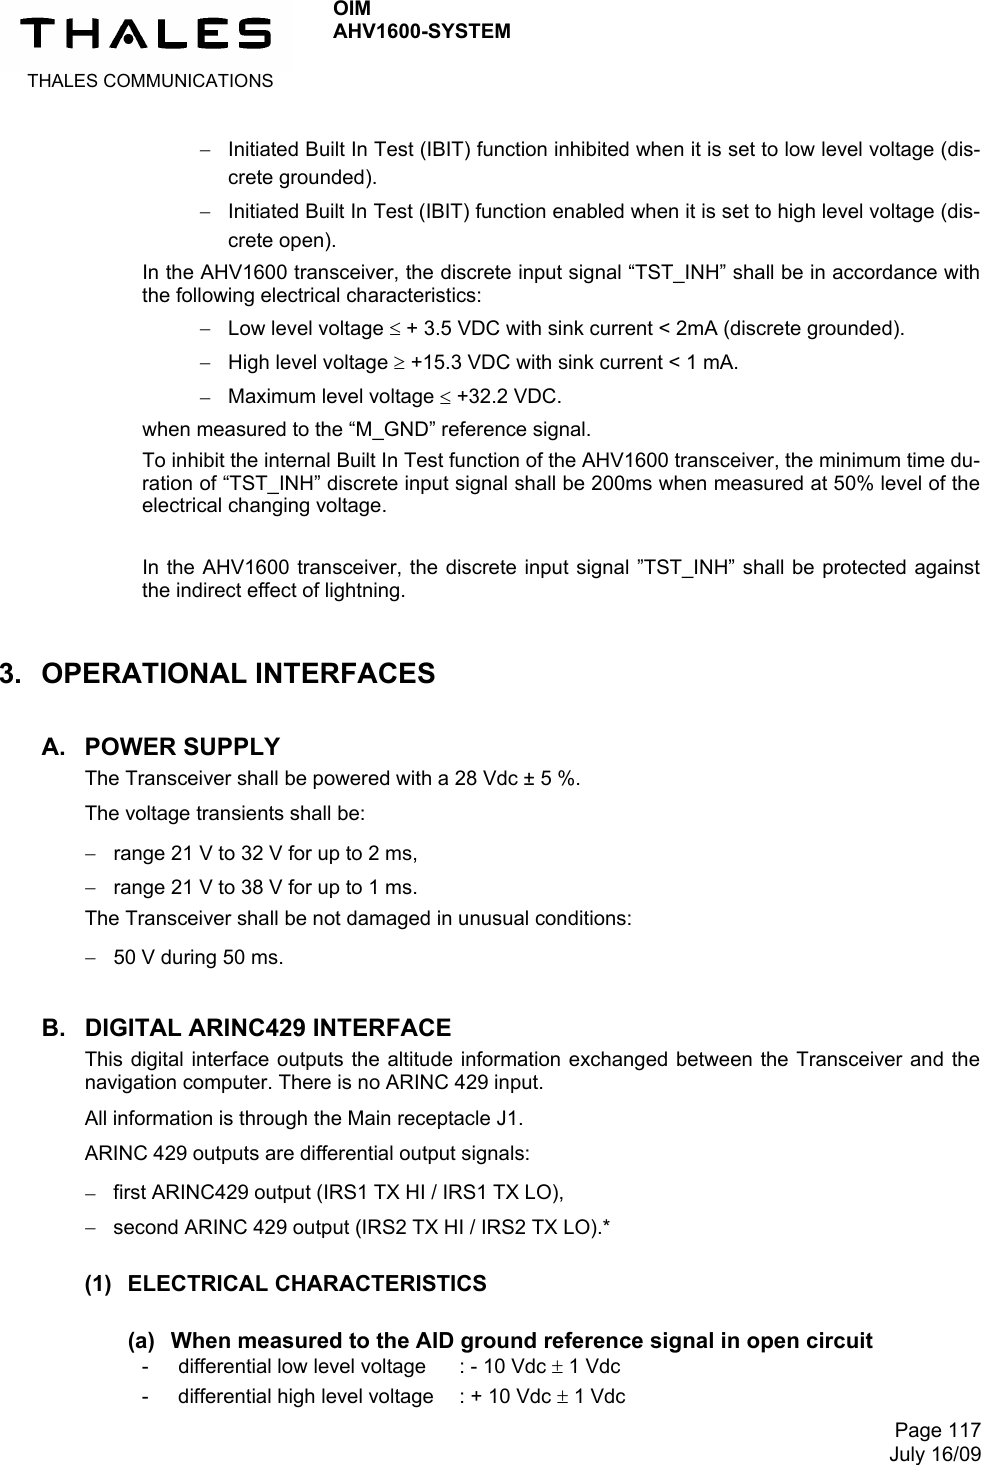  THALES COMMUNICATIONS OIM AHV1600-SYSTEM     Page 117July 16/09  Initiated Built In Test (IBIT) function inhibited when it is set to low level voltage (dis-crete grounded).  Initiated Built In Test (IBIT) function enabled when it is set to high level voltage (dis-crete open). In the AHV1600 transceiver, the discrete input signal “TST_INH” shall be in accordance with the following electrical characteristics:  Low level voltage  + 3.5 VDC with sink current &lt; 2mA (discrete grounded).  High level voltage  +15.3 VDC with sink current &lt; 1 mA.  Maximum level voltage  +32.2 VDC. when measured to the “M_GND” reference signal. To inhibit the internal Built In Test function of the AHV1600 transceiver, the minimum time du-ration of “TST_INH” discrete input signal shall be 200ms when measured at 50% level of the electrical changing voltage.  In the AHV1600 transceiver, the discrete input signal ”TST_INH” shall be protected against the indirect effect of lightning. 3. OPERATIONAL INTERFACES A. POWER SUPPLY  The Transceiver shall be powered with a 28 Vdc ± 5 %. The voltage transients shall be:  range 21 V to 32 V for up to 2 ms,  range 21 V to 38 V for up to 1 ms. The Transceiver shall be not damaged in unusual conditions:  50 V during 50 ms. B.  DIGITAL ARINC429 INTERFACE This digital interface outputs the altitude information exchanged between the Transceiver and the navigation computer. There is no ARINC 429 input. All information is through the Main receptacle J1. ARINC 429 outputs are differential output signals:  first ARINC429 output (IRS1 TX HI / IRS1 TX LO),  second ARINC 429 output (IRS2 TX HI / IRS2 TX LO).* (1) ELECTRICAL CHARACTERISTICS (a)  When measured to the AID ground reference signal in open circuit - differential low level voltage   : - 10 Vdc  1 Vdc -  differential high level voltage  : + 10 Vdc  1 Vdc 